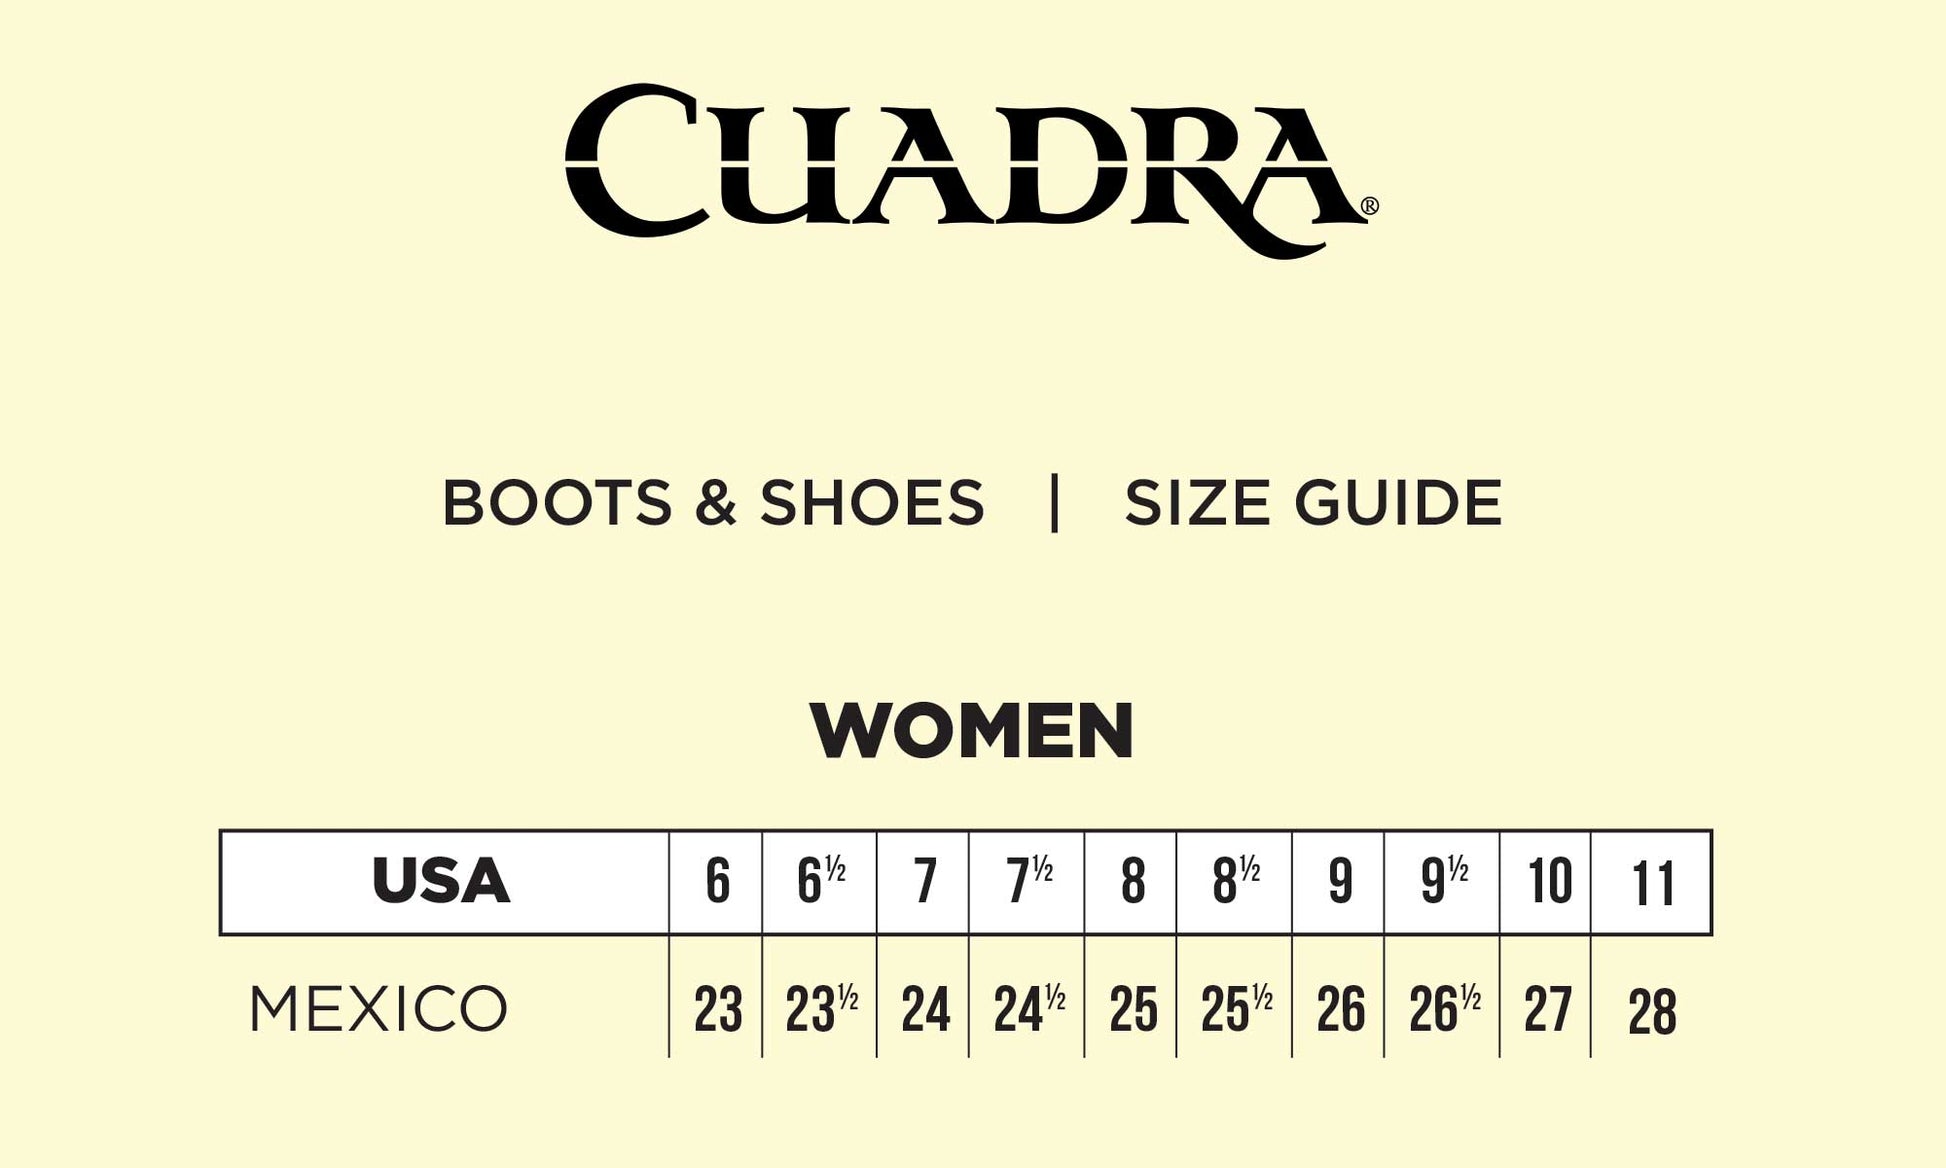 Cuadra Boots & Shoes Size Guide